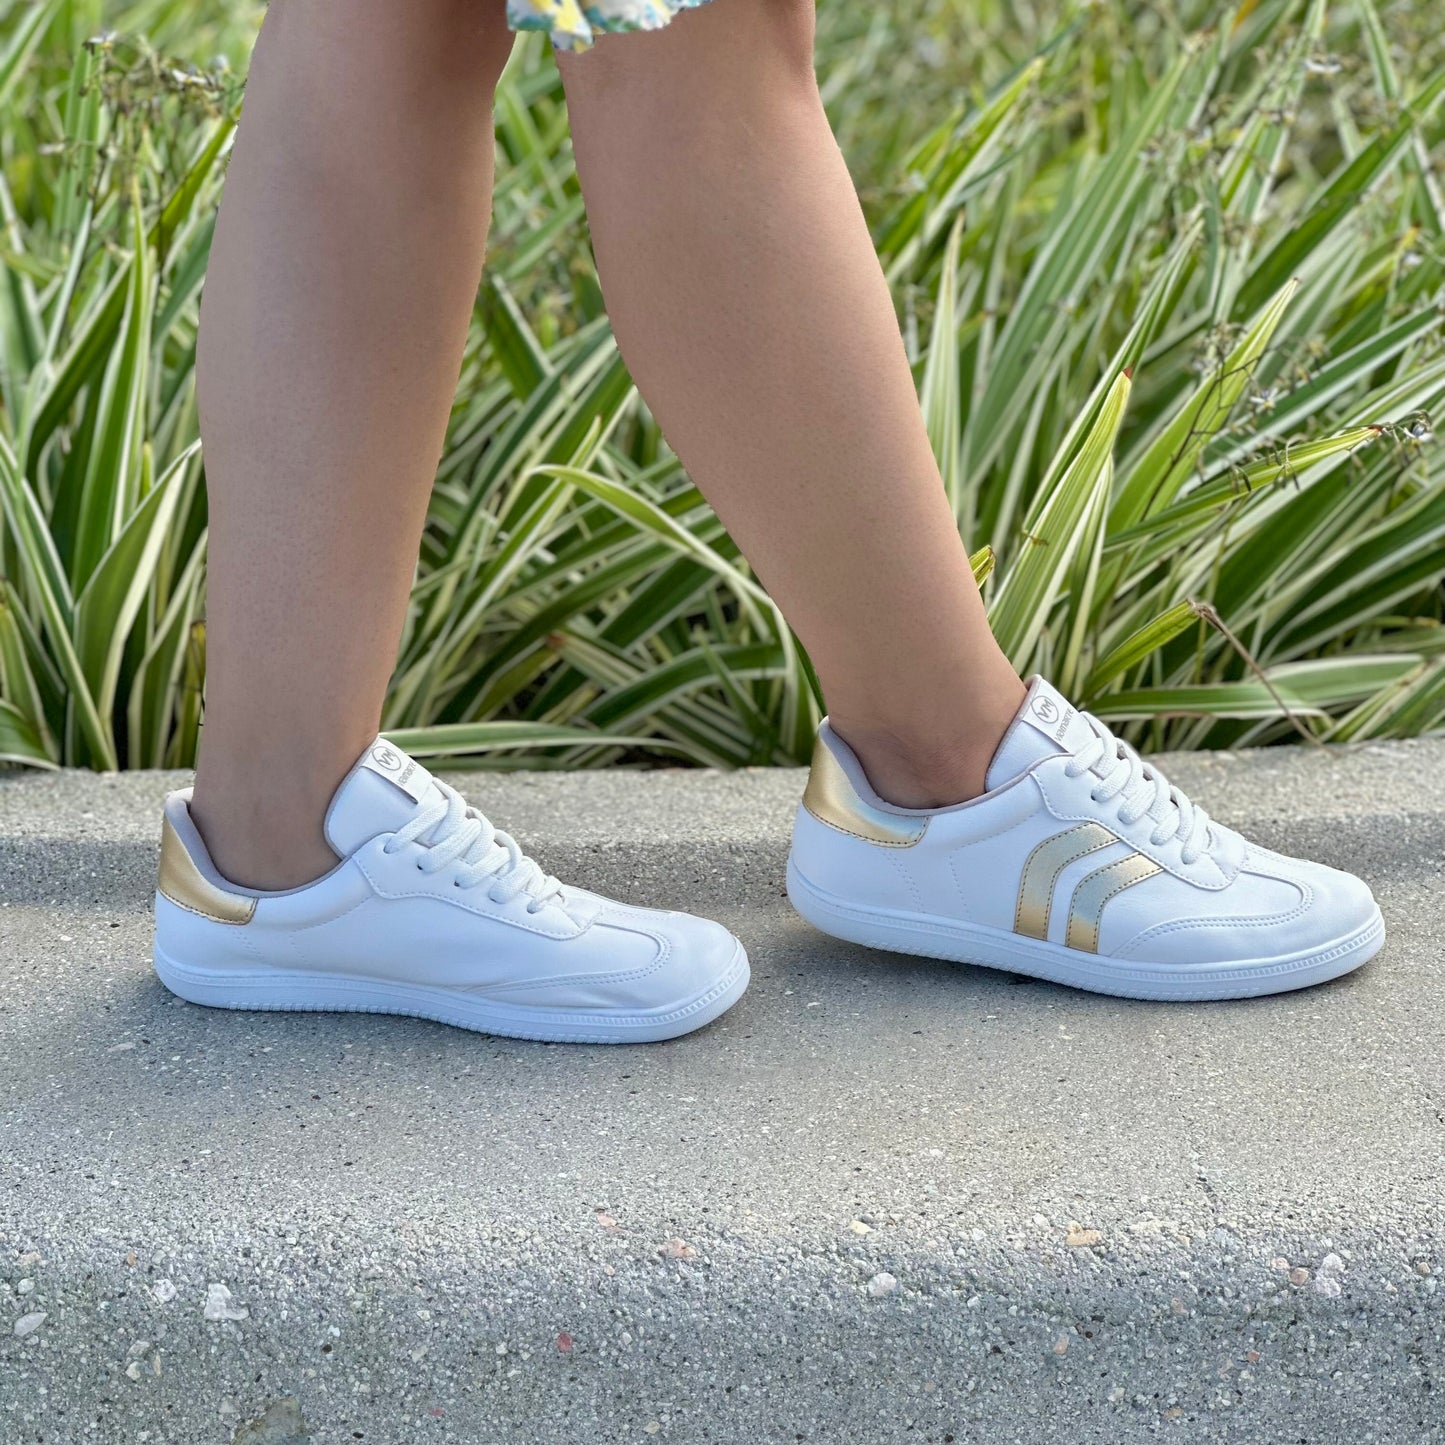 Cecile white and gold low sneaker